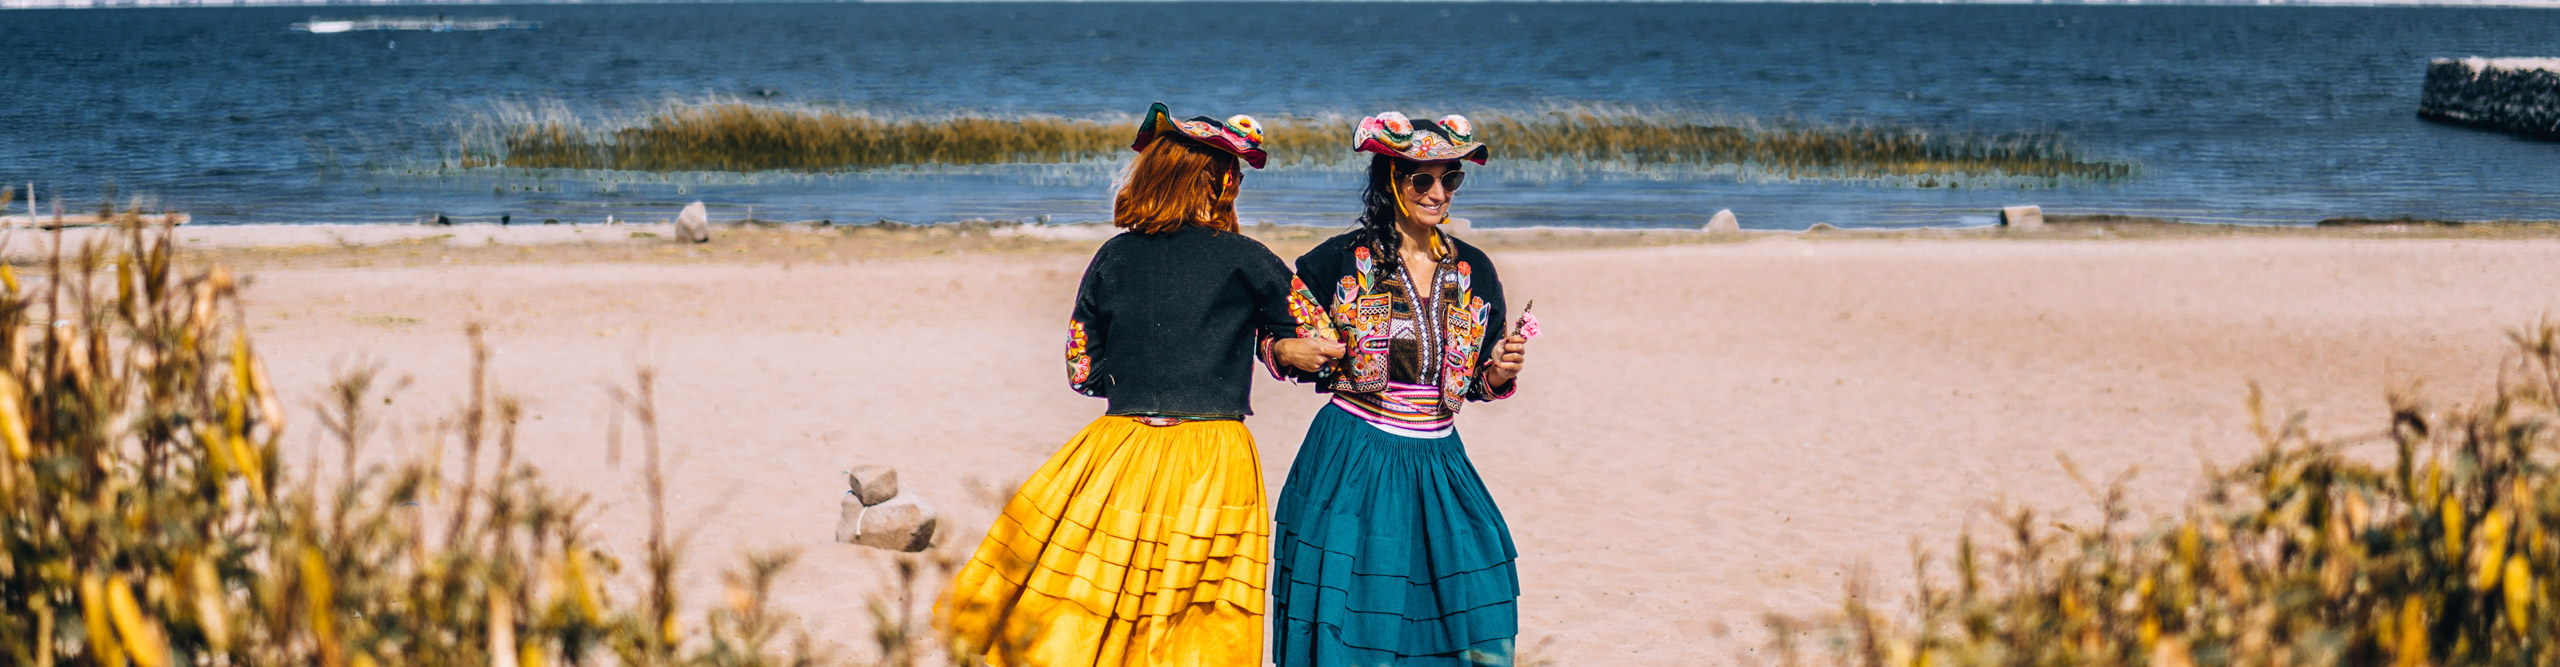 Women in traditional dress dancing on the shores of Lake Titikaka, in the sunshine, Peru 